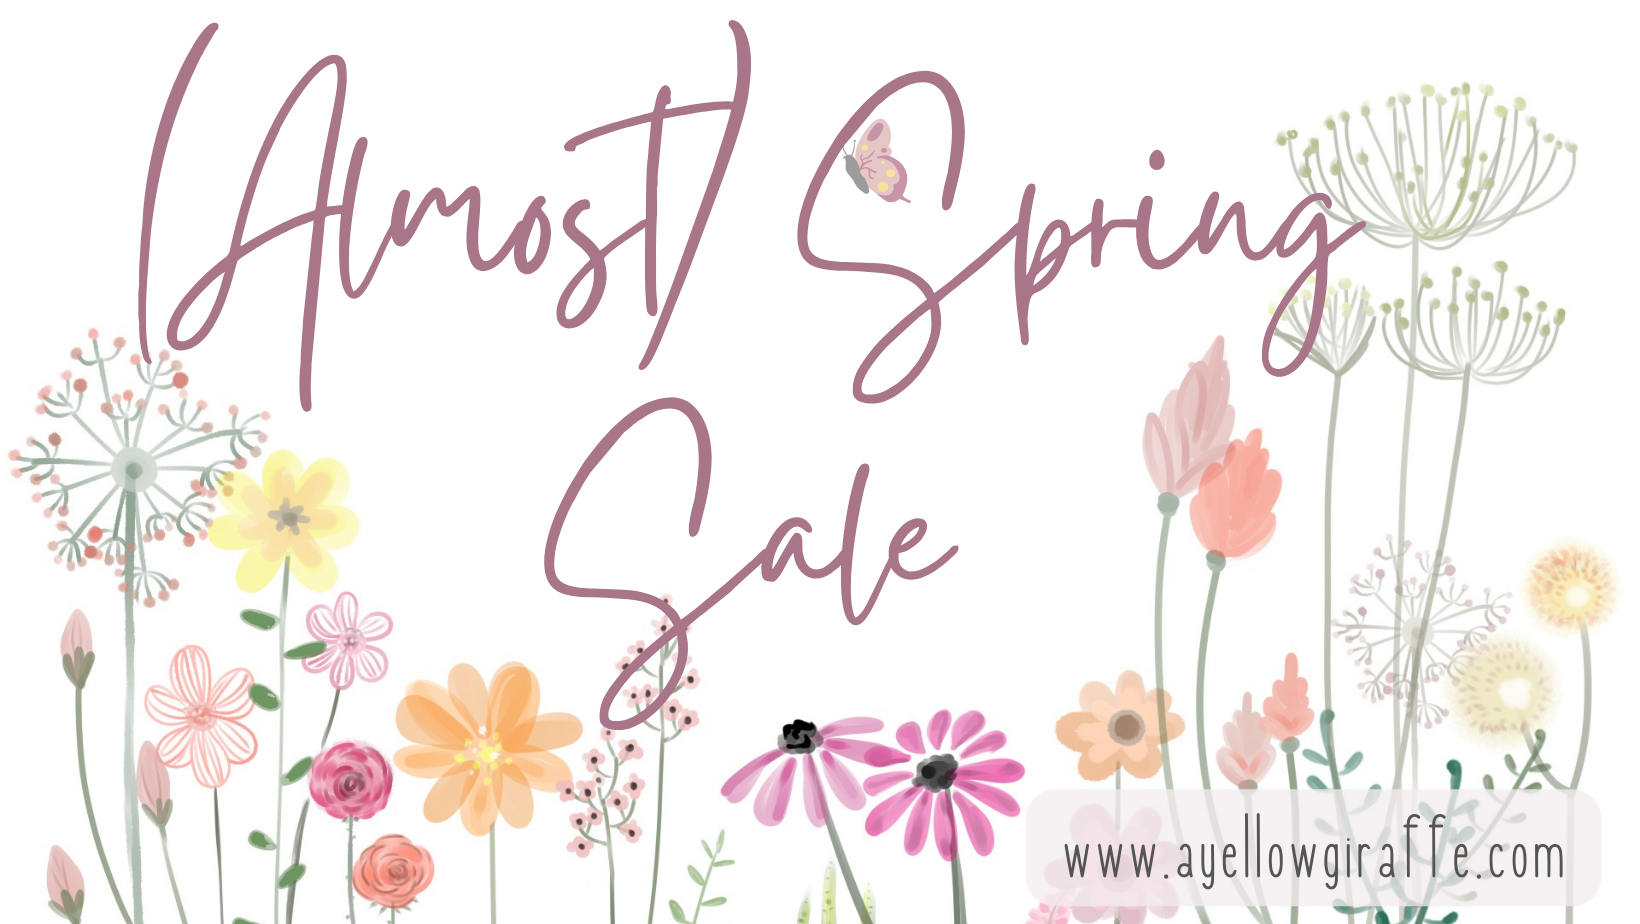 (Almost) Spring Sale Going on Now!